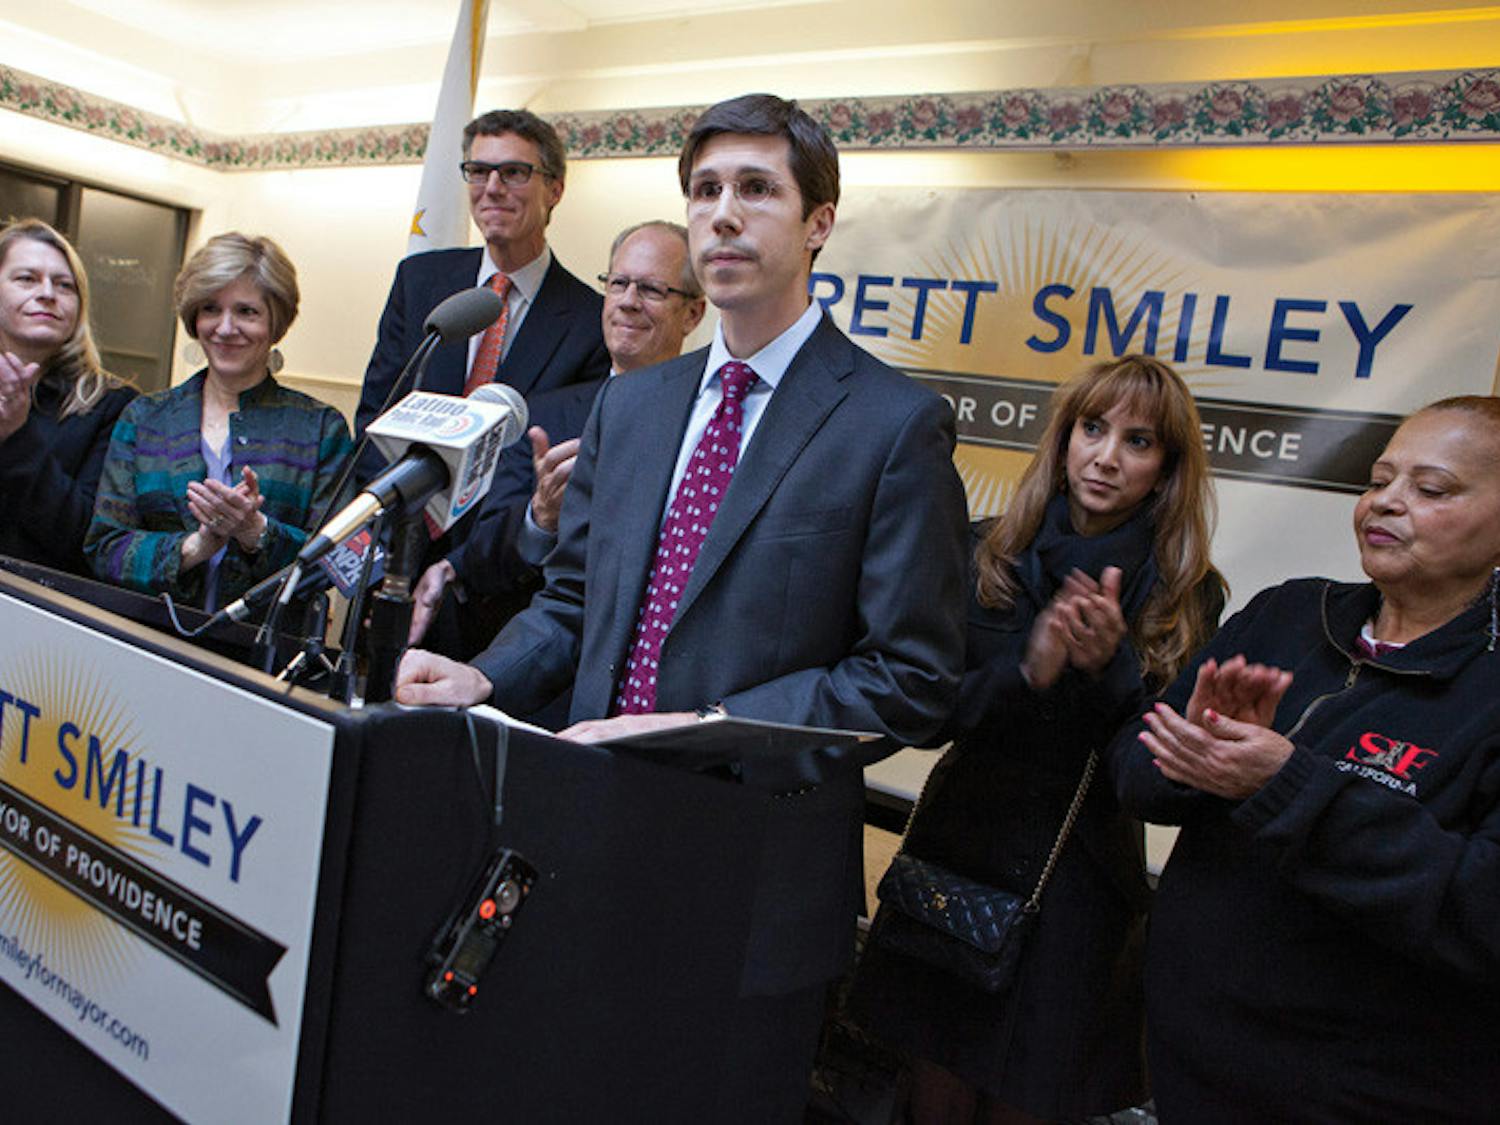 Boney_Smiley_CO-the-Smiley-for-Mayor-campaign